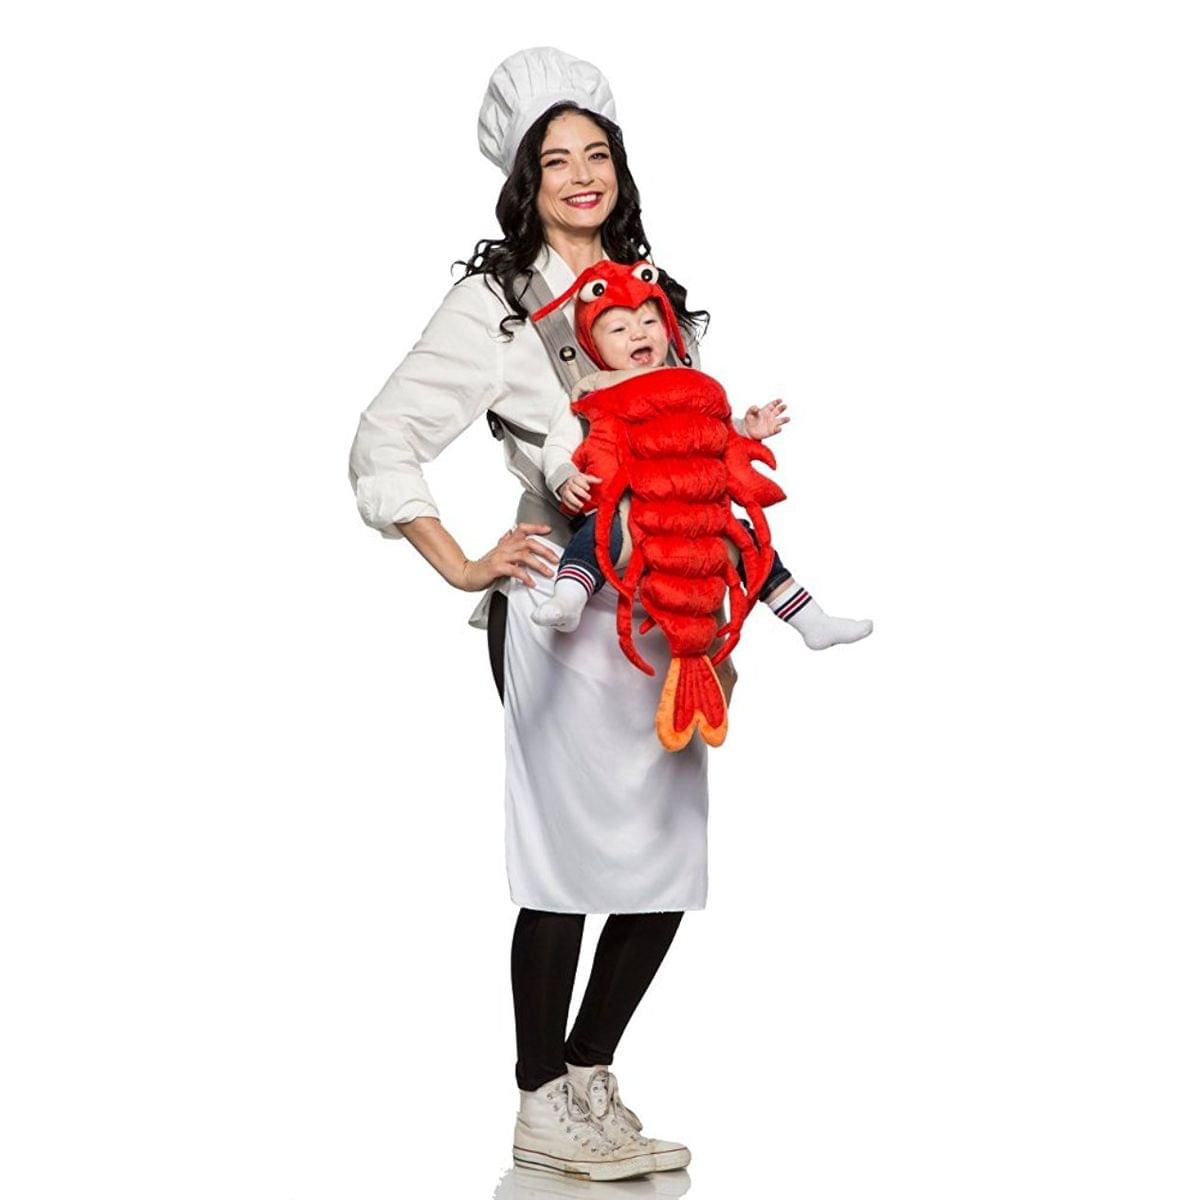 Master Chef and Maine Lobster Mommy & Me Costume